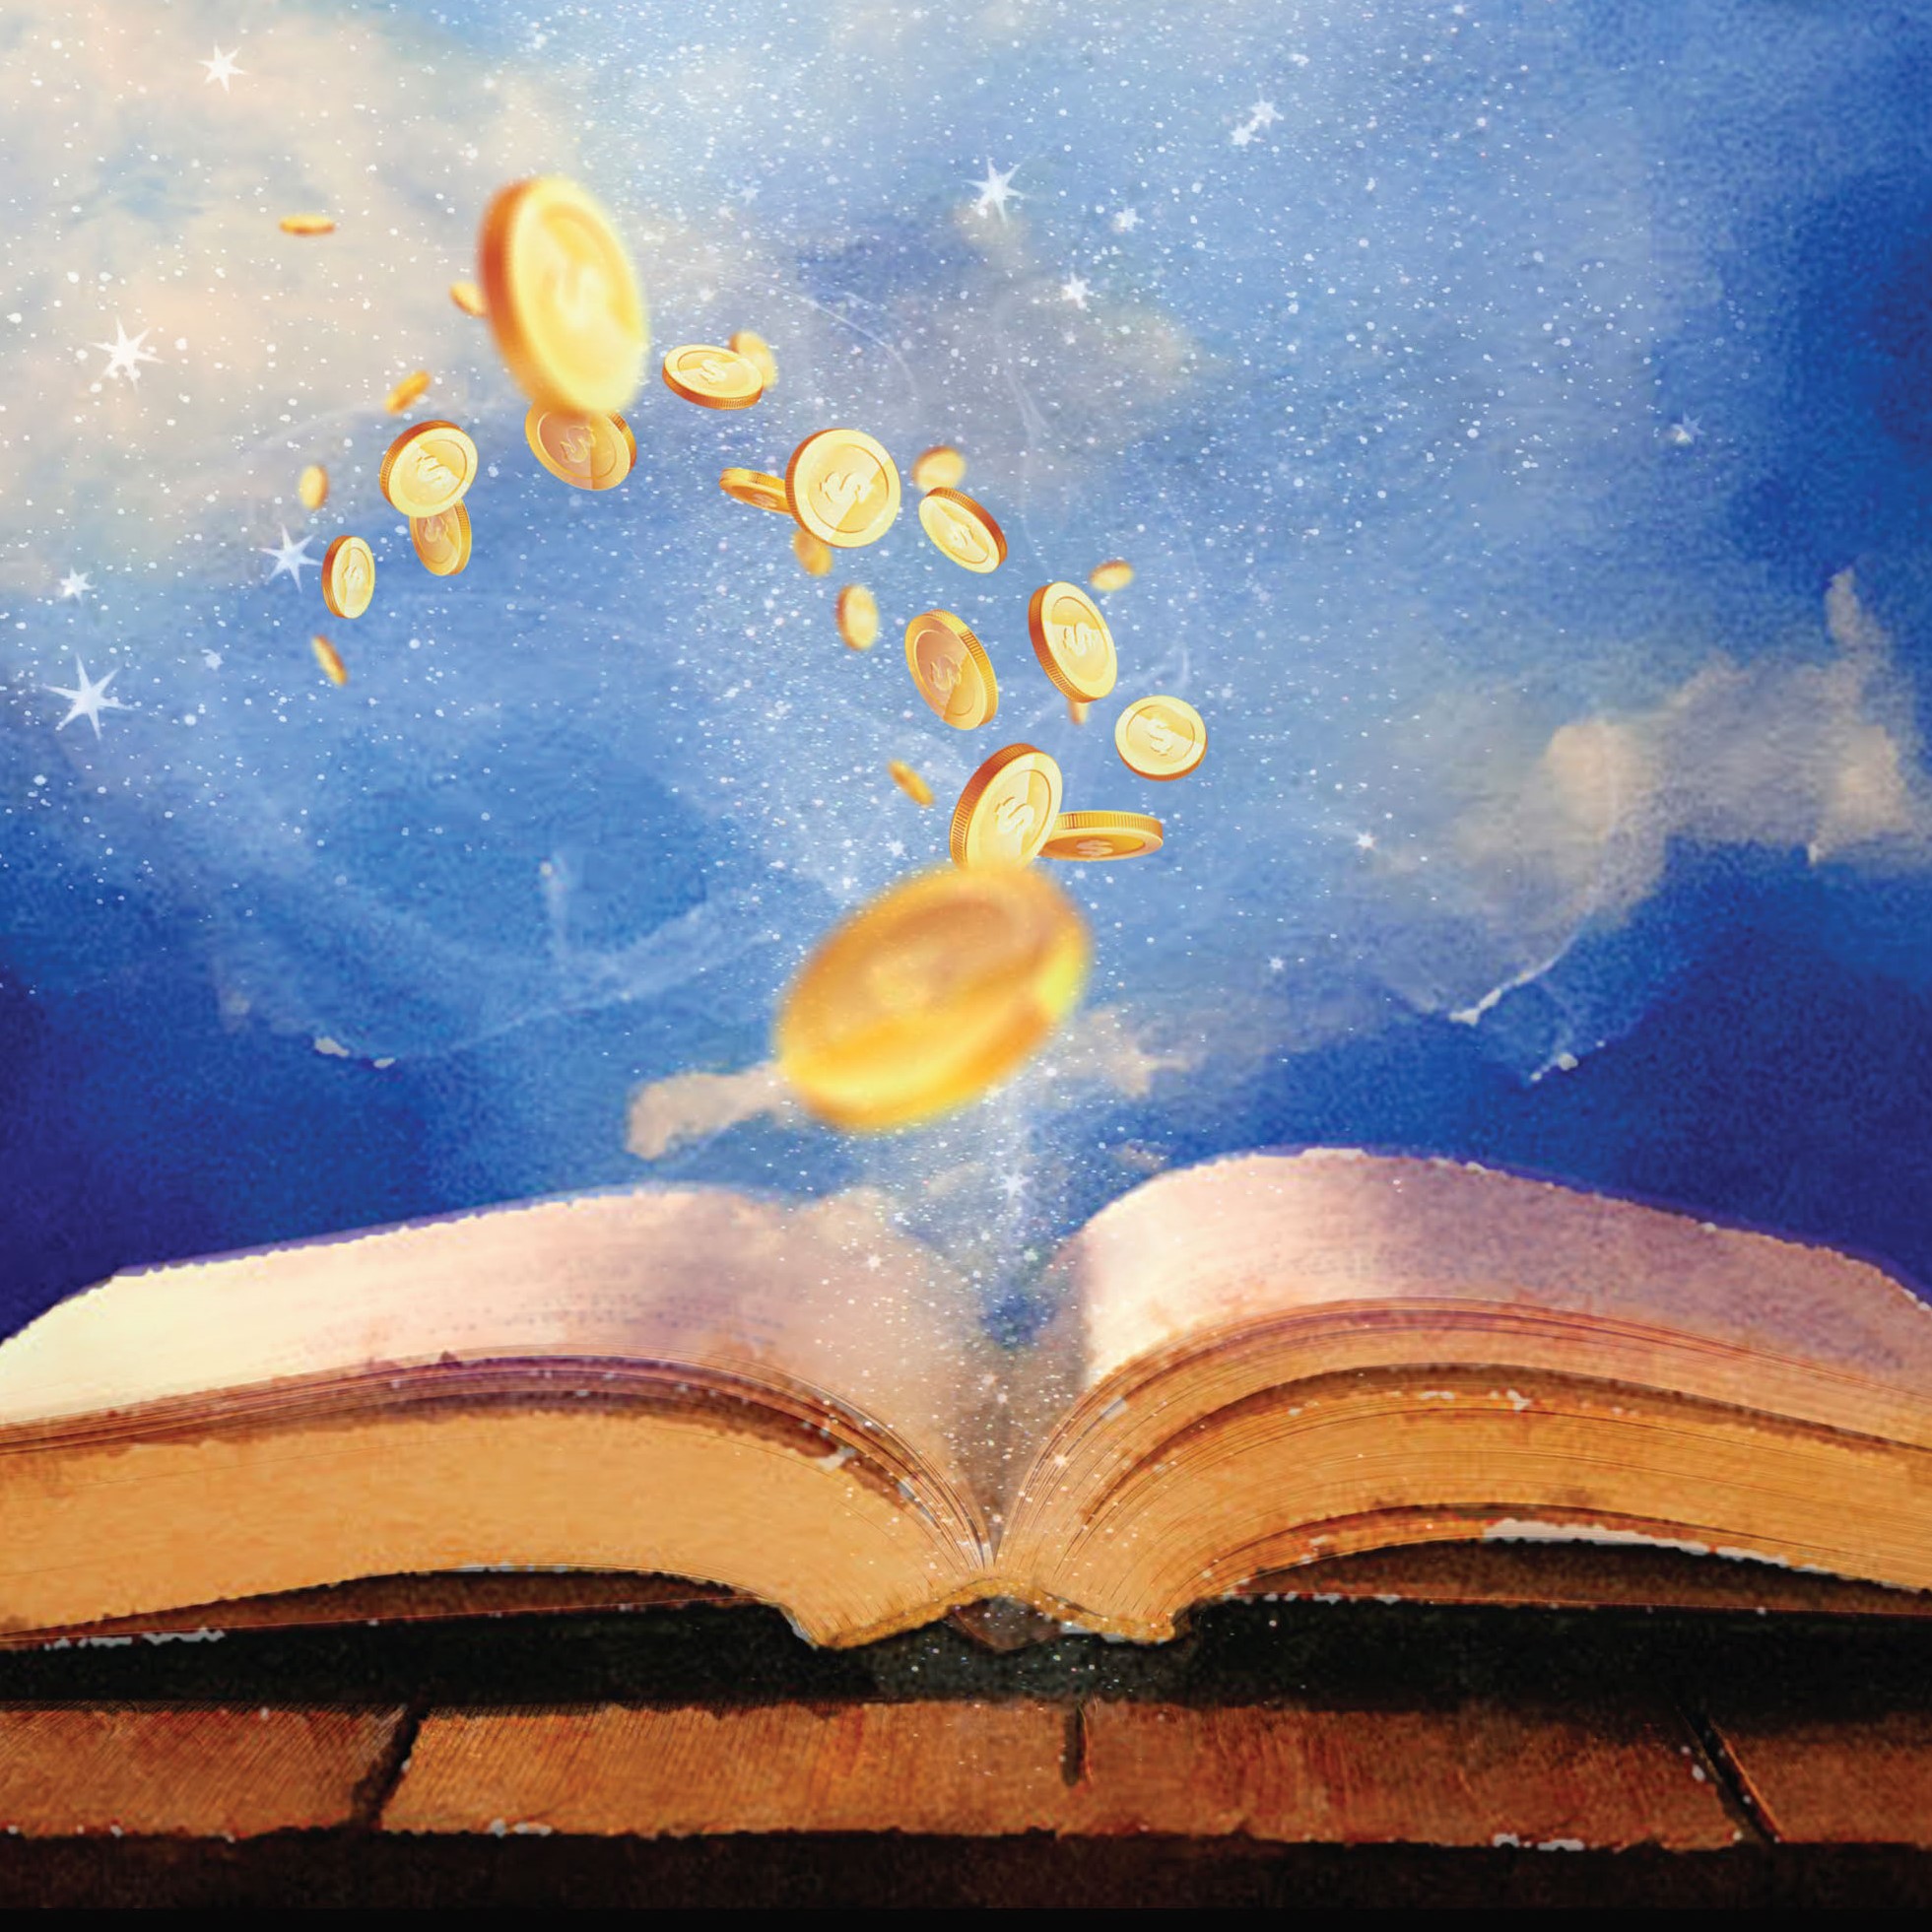 Book with gold coins swirling out into the sky and clouds.